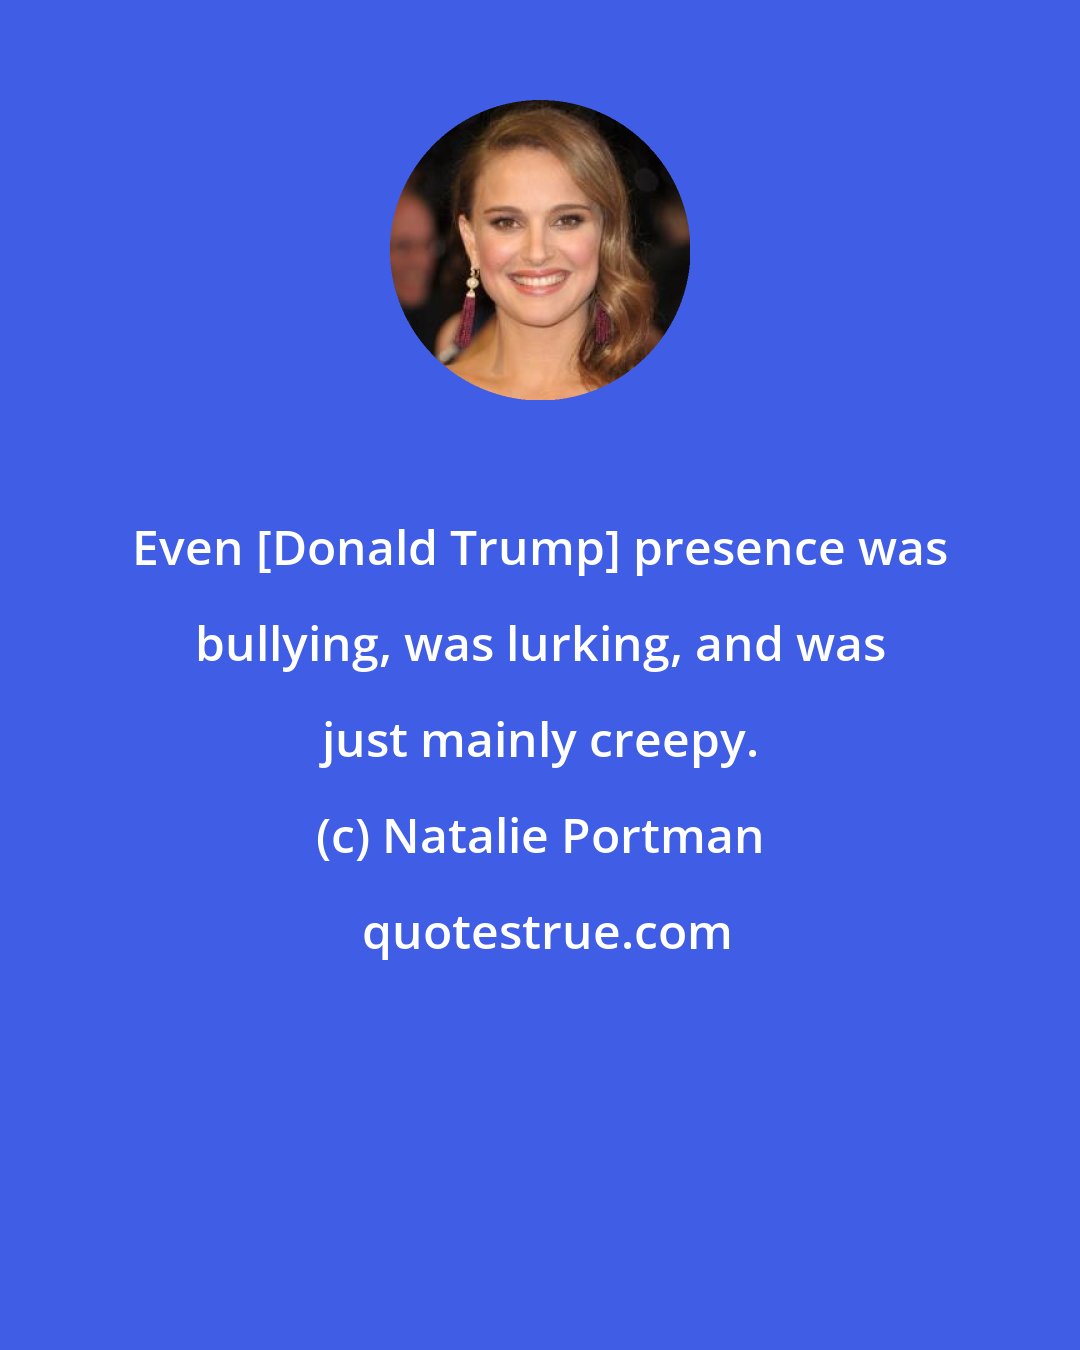 Natalie Portman: Even [Donald Trump] presence was bullying, was lurking, and was just mainly creepy.